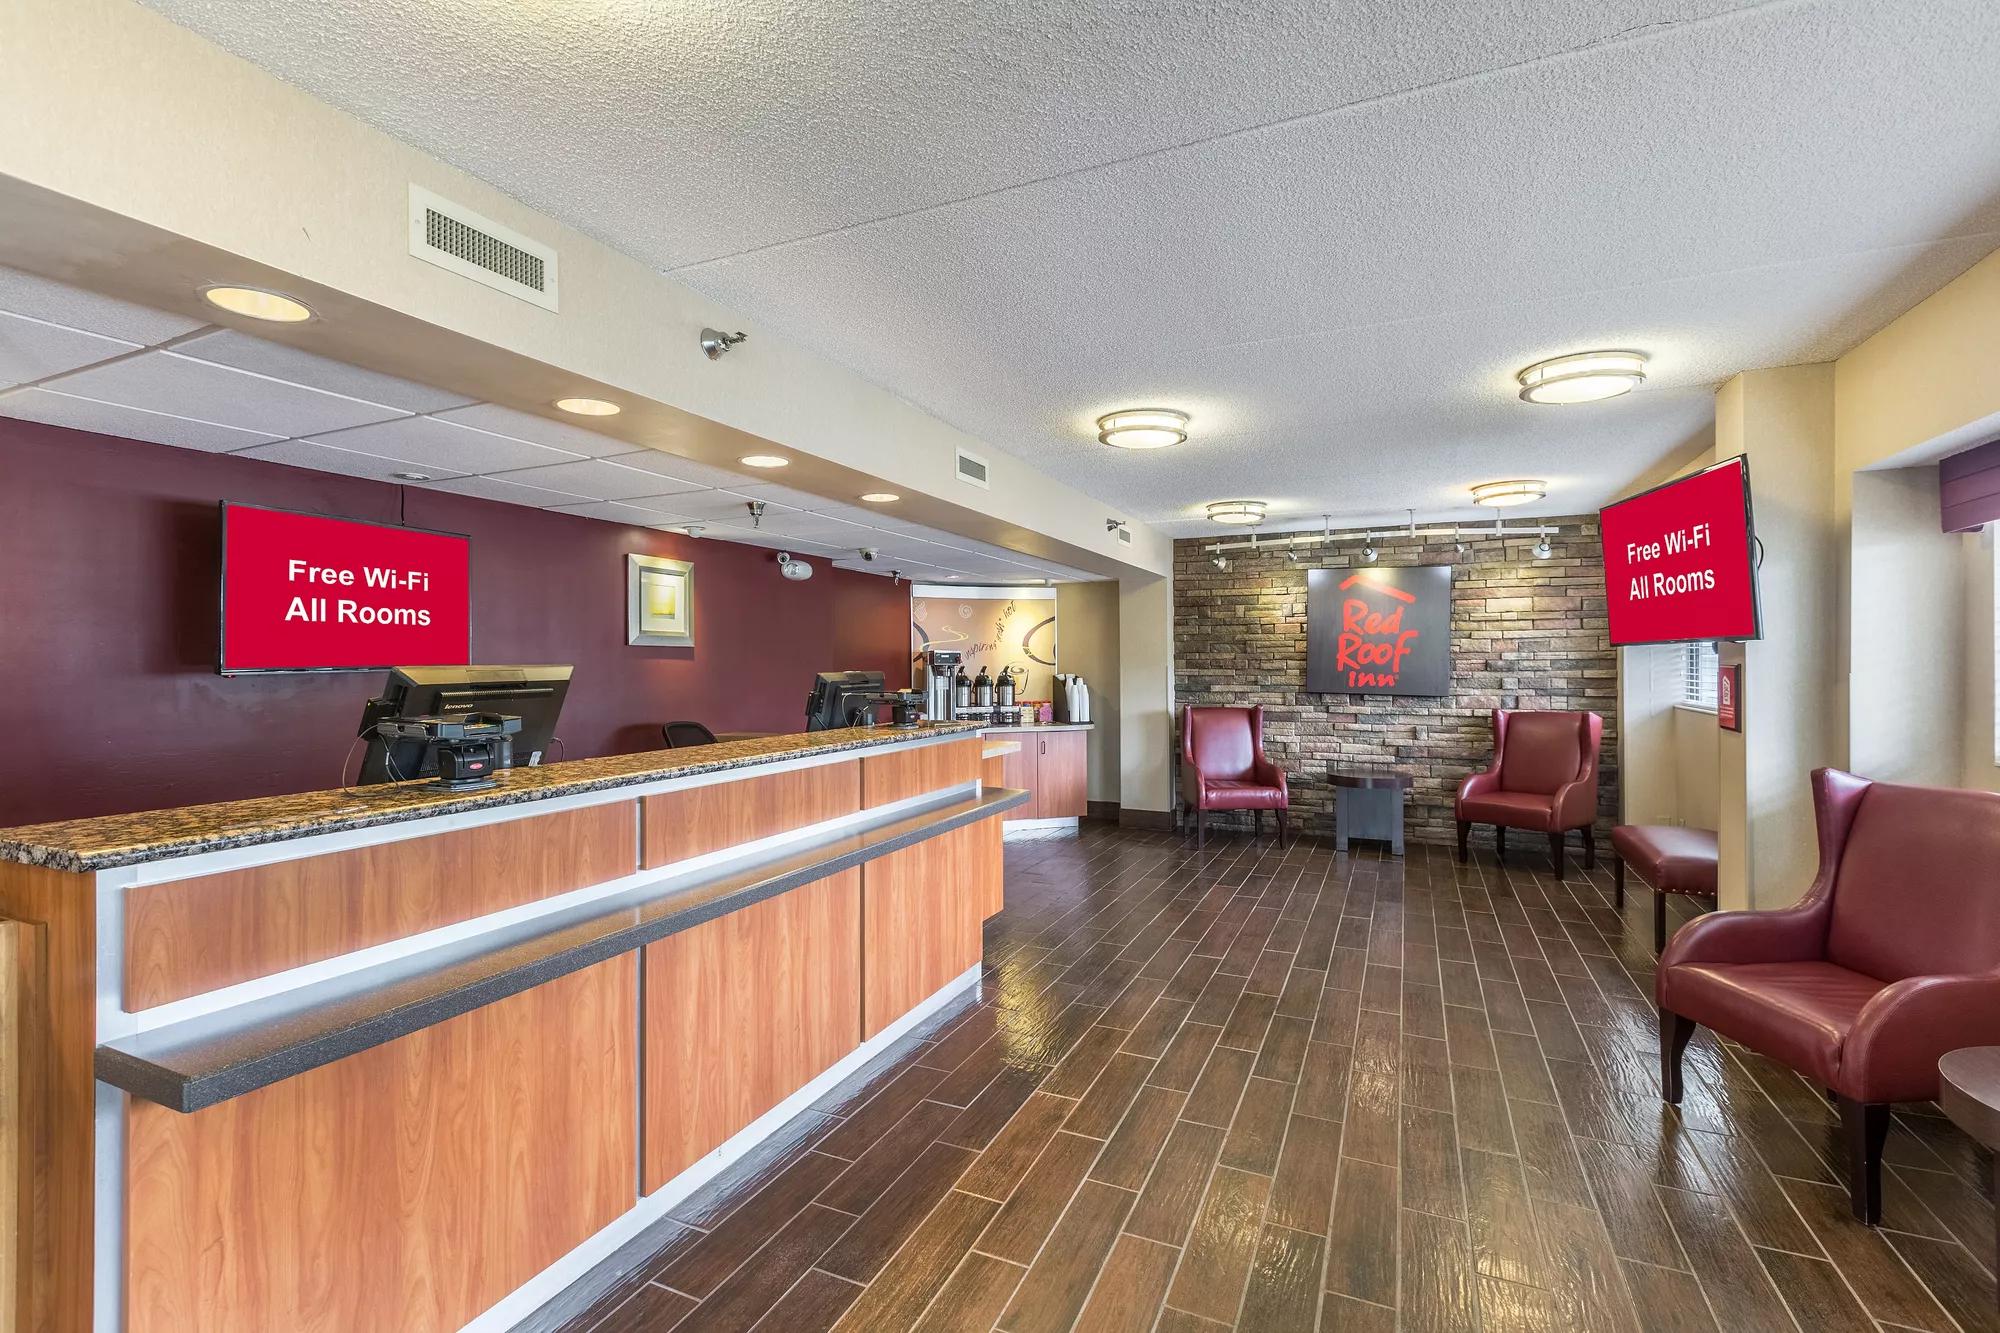 Red Roof Inn Minneapolis - Plymouth Front Desk and Lobby Image